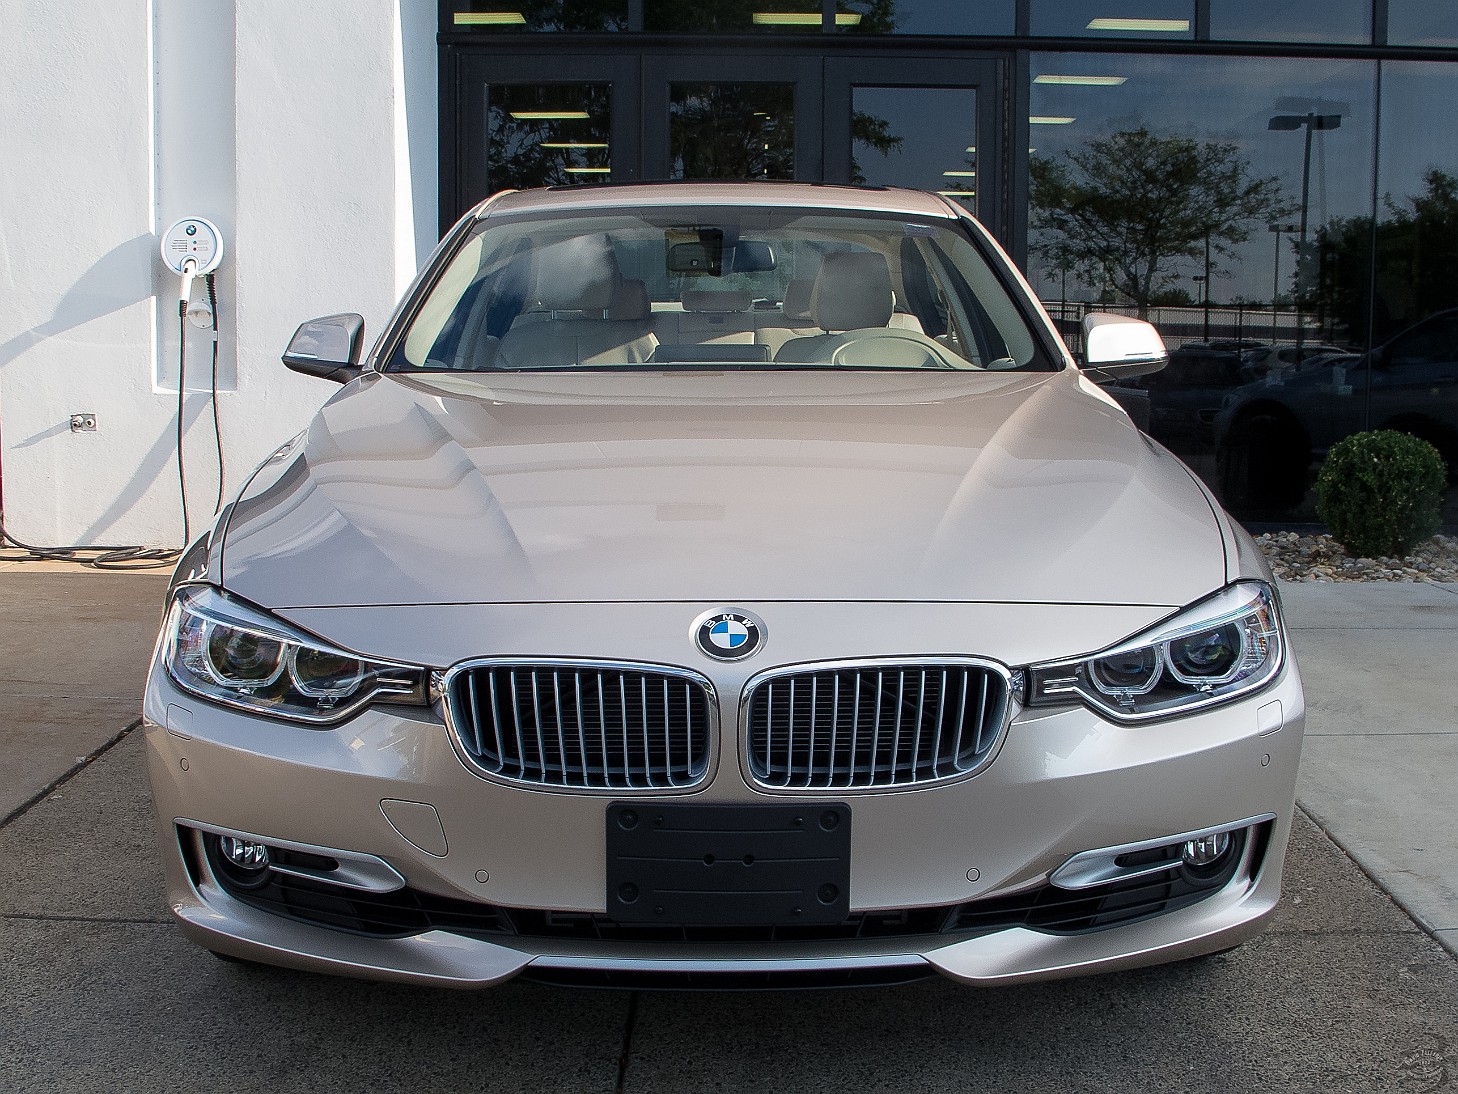 BMW328xiDelivery2012-002